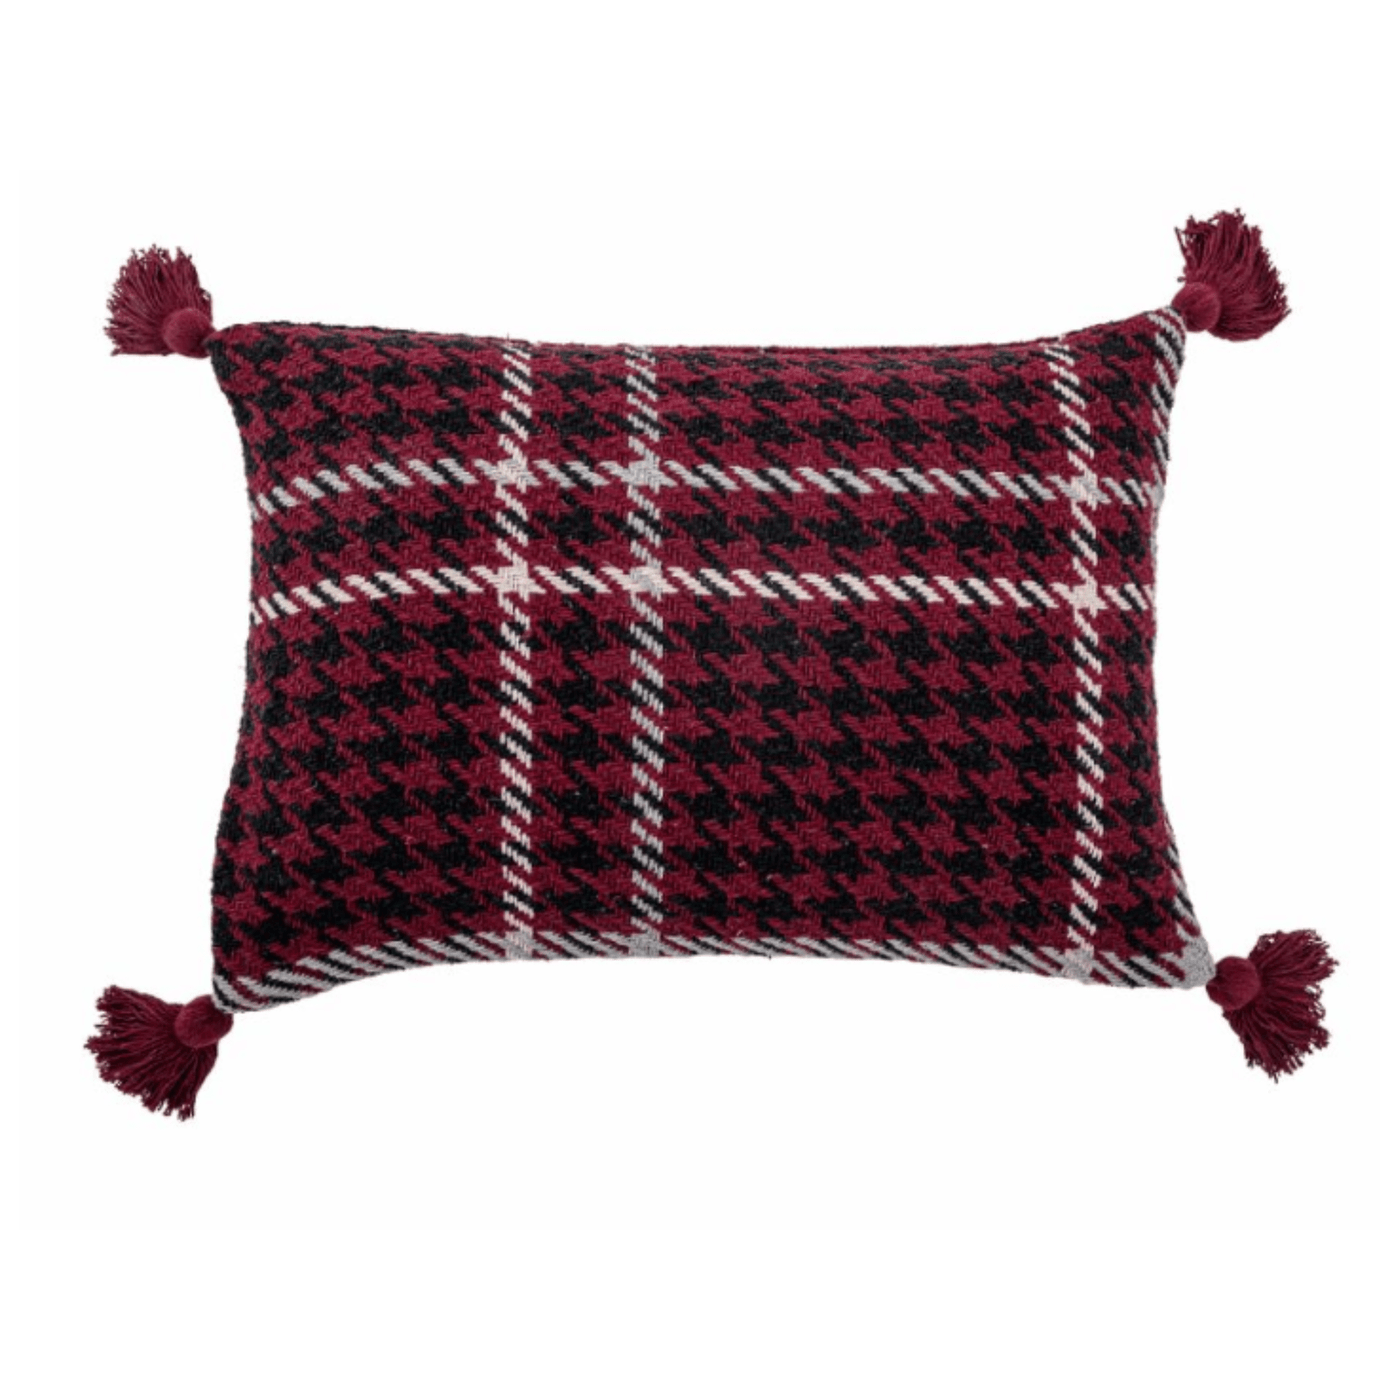 Bloomingville Group Christmas Rivel Cushion, Red, Recycled Cotton